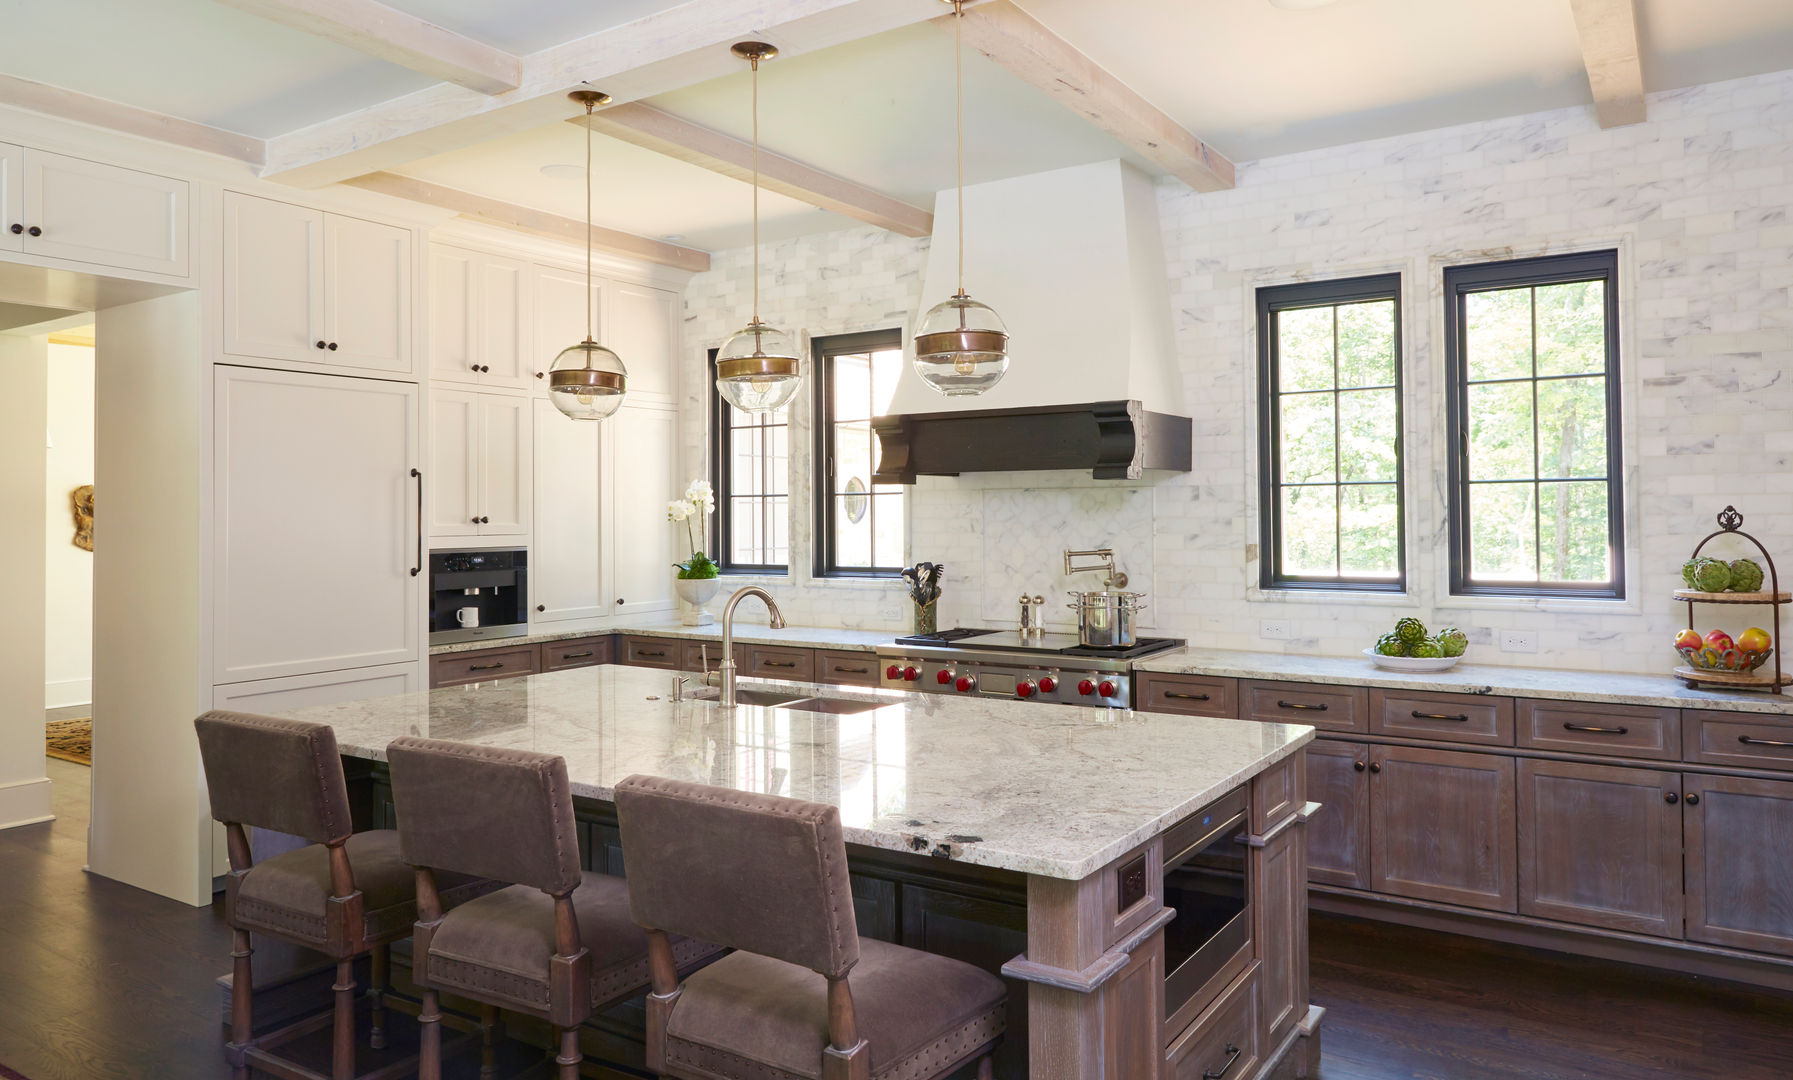 French Normandy Indian Springs Home, Christopher Architecture & Interiors Christopher Architecture & Interiors Classic style kitchen